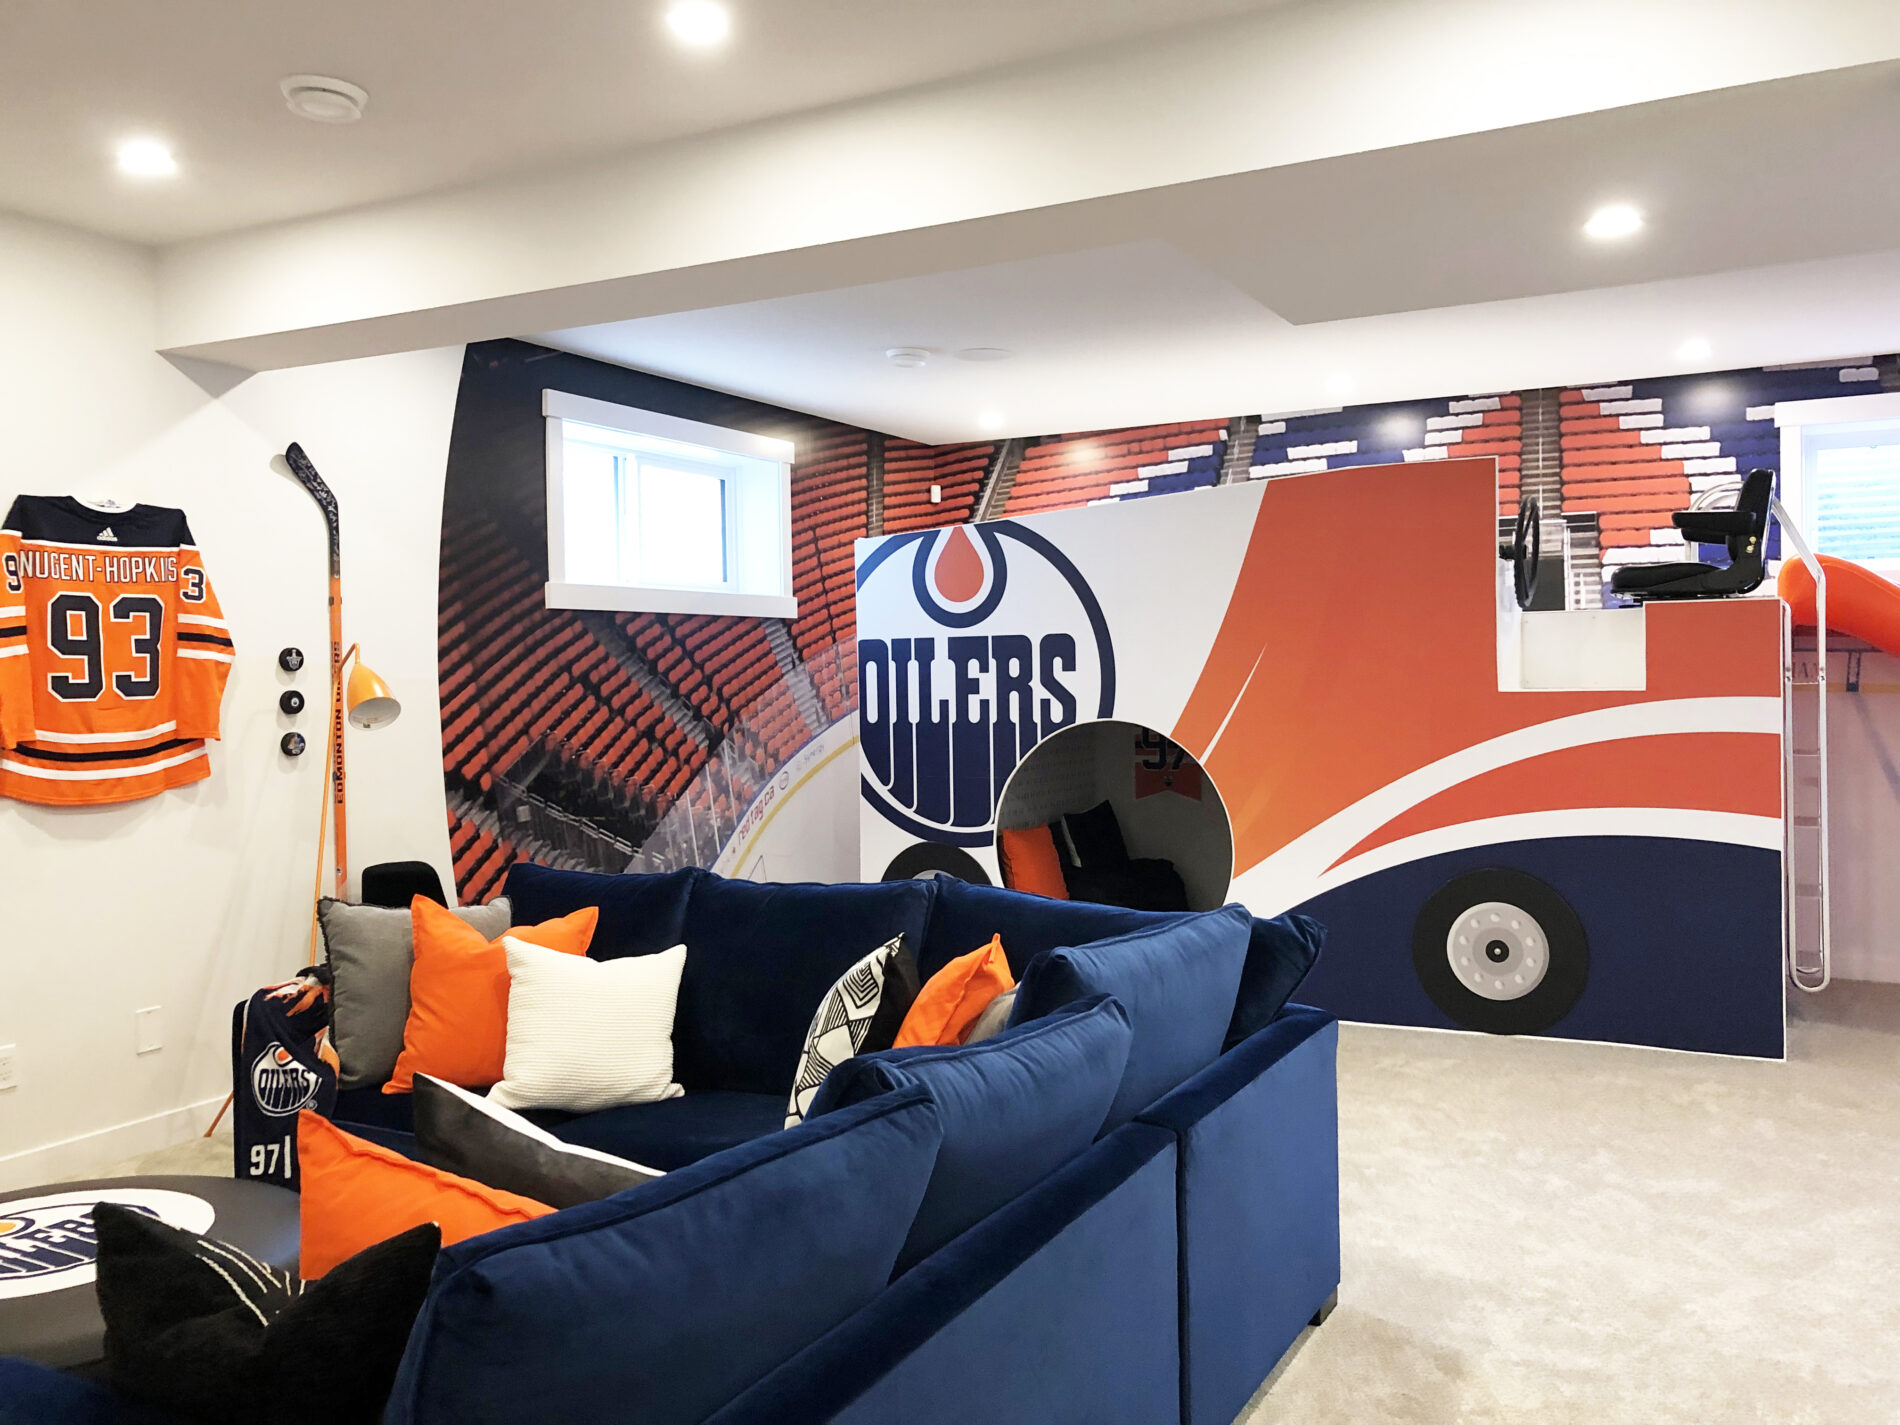 Zamboni play structure in basement Oilers Fan Cave in Dione showhome with wall mural of the stands of Rogers Place arena on the walls behind